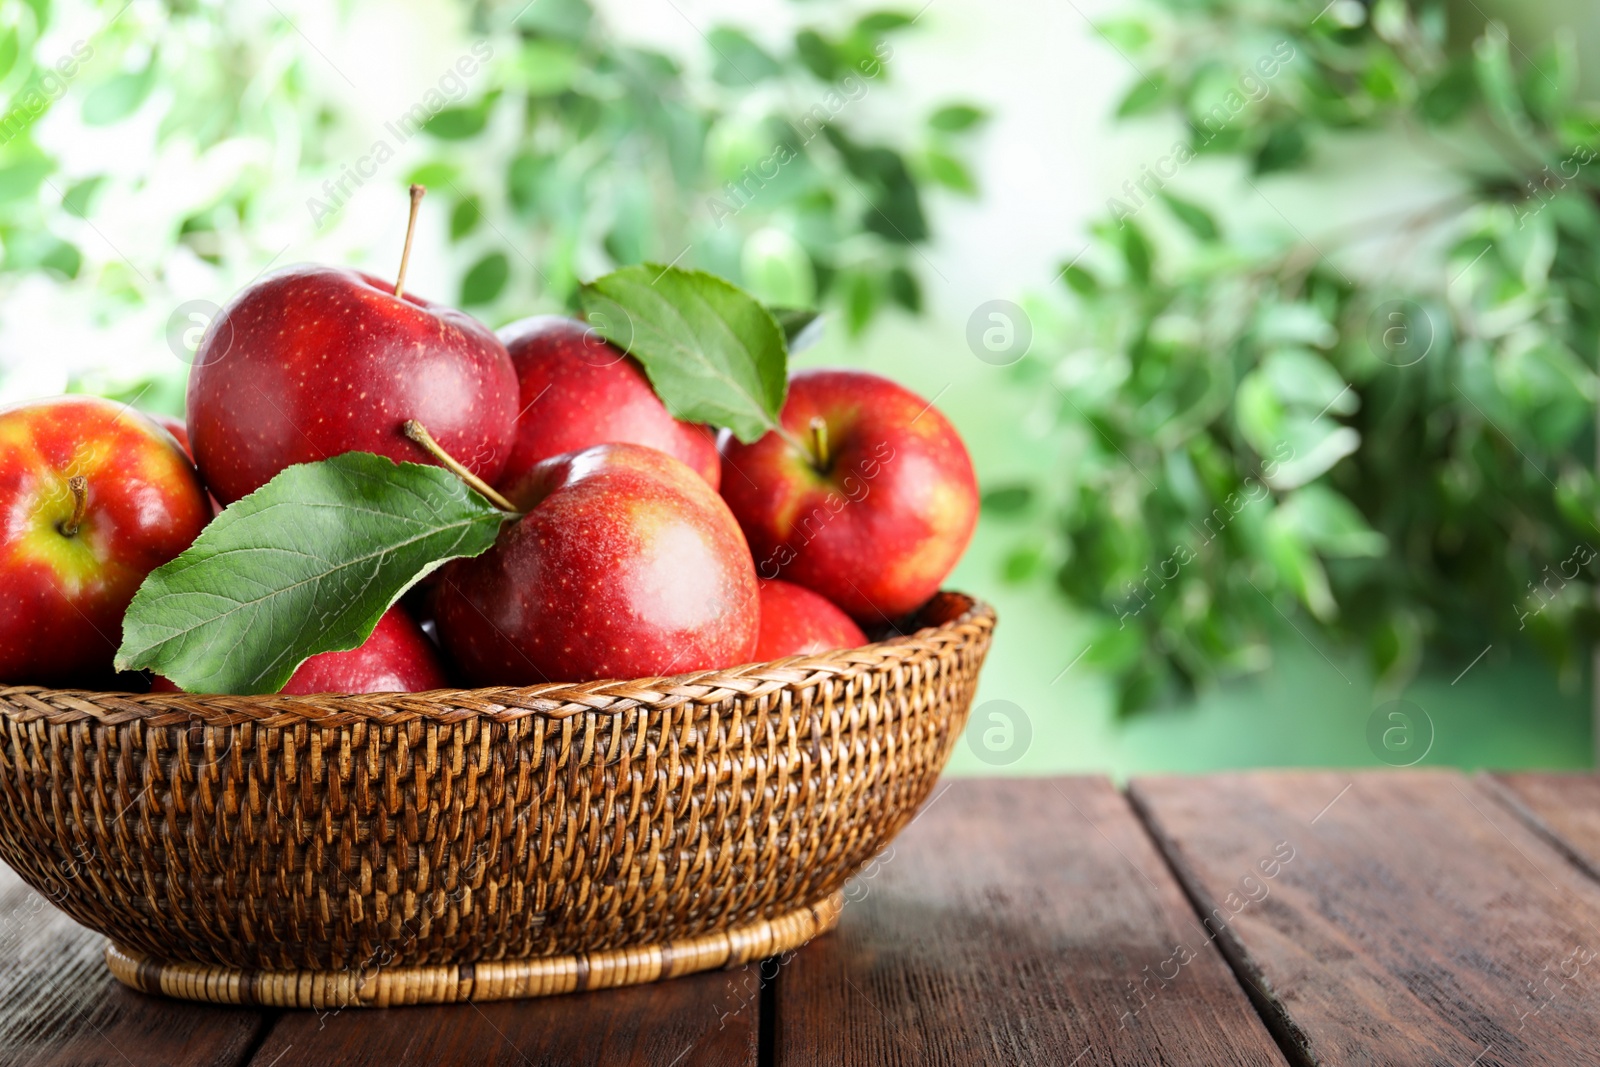 Photo of Ripe red apples in wicker bowl on wooden table against blurred background. Space for text